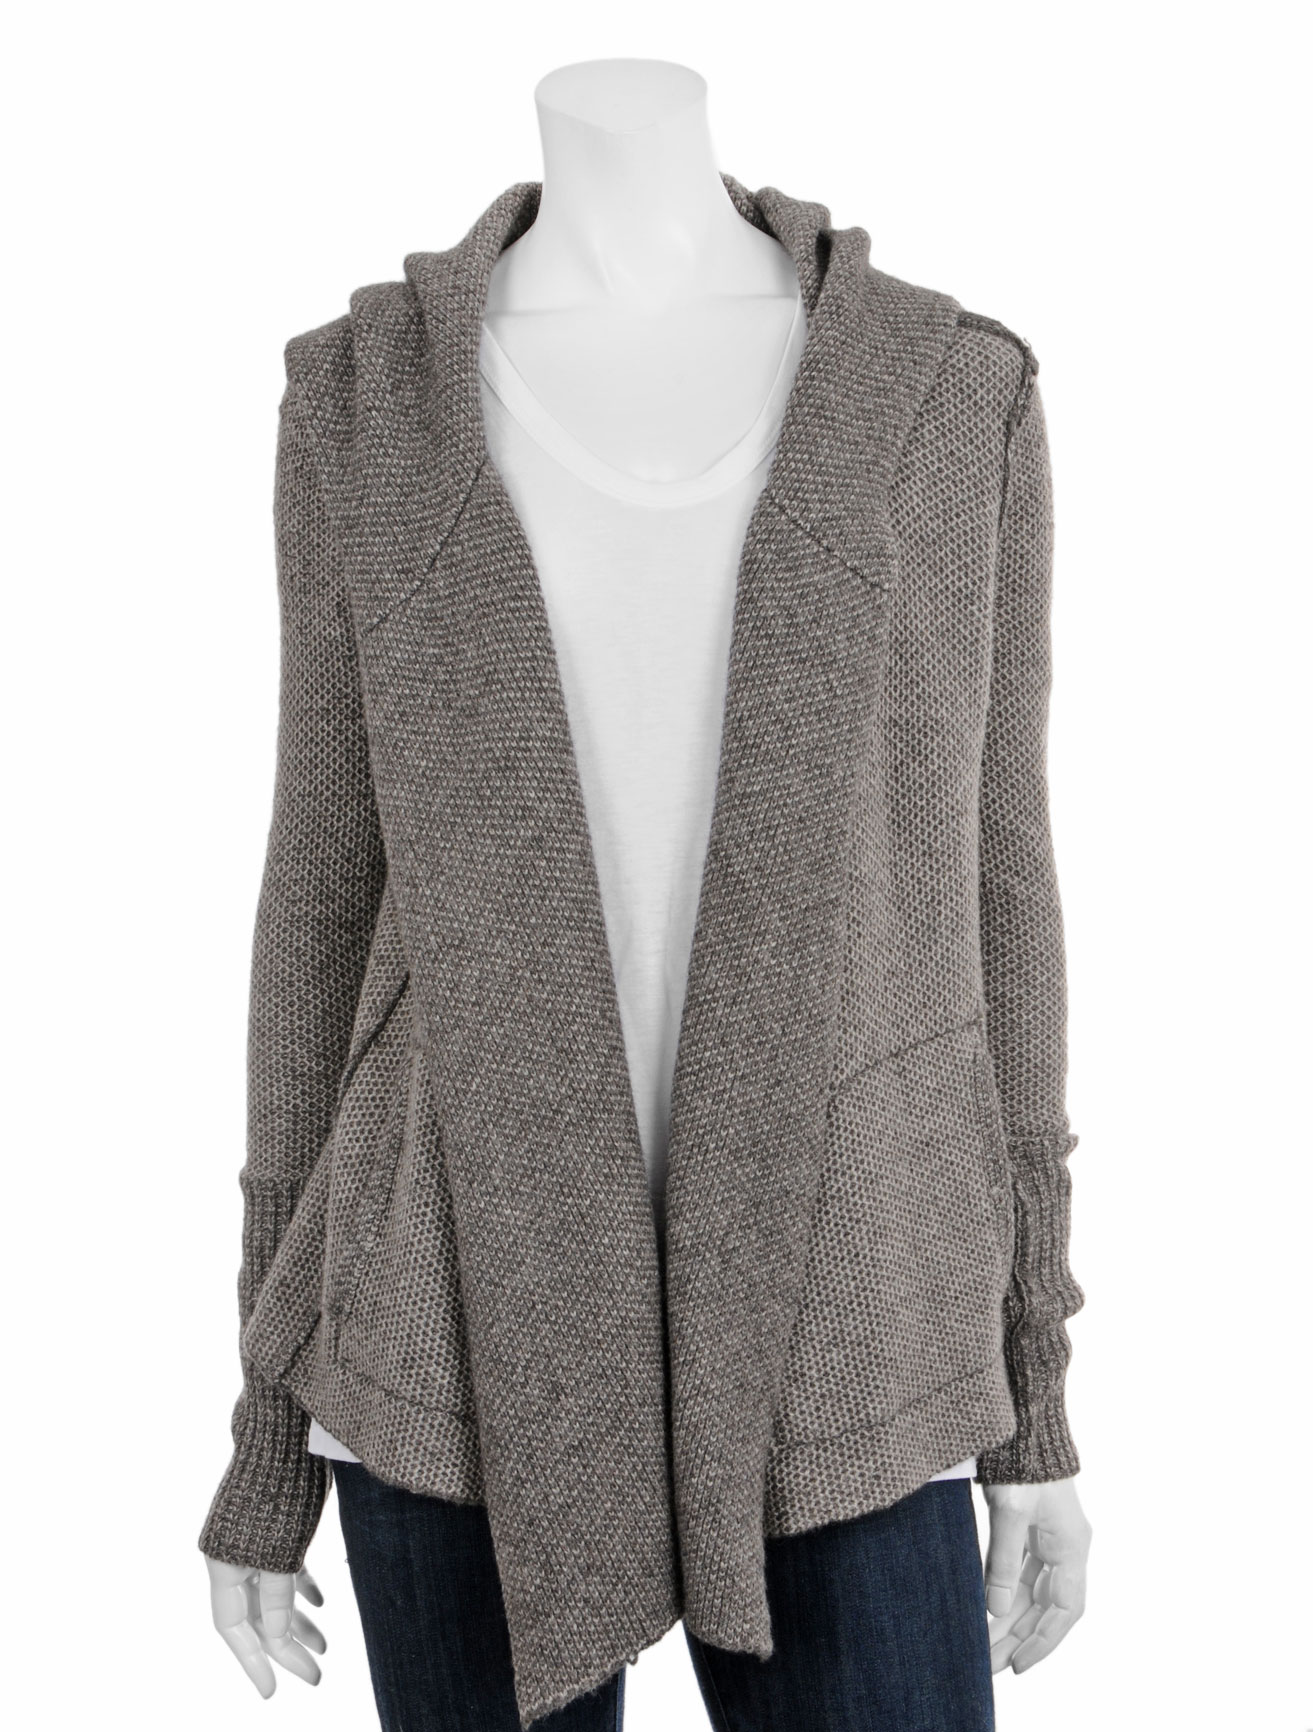 Inhabit Honeycomb Stitch Hooded Sweater in Gray (grey) | Lyst